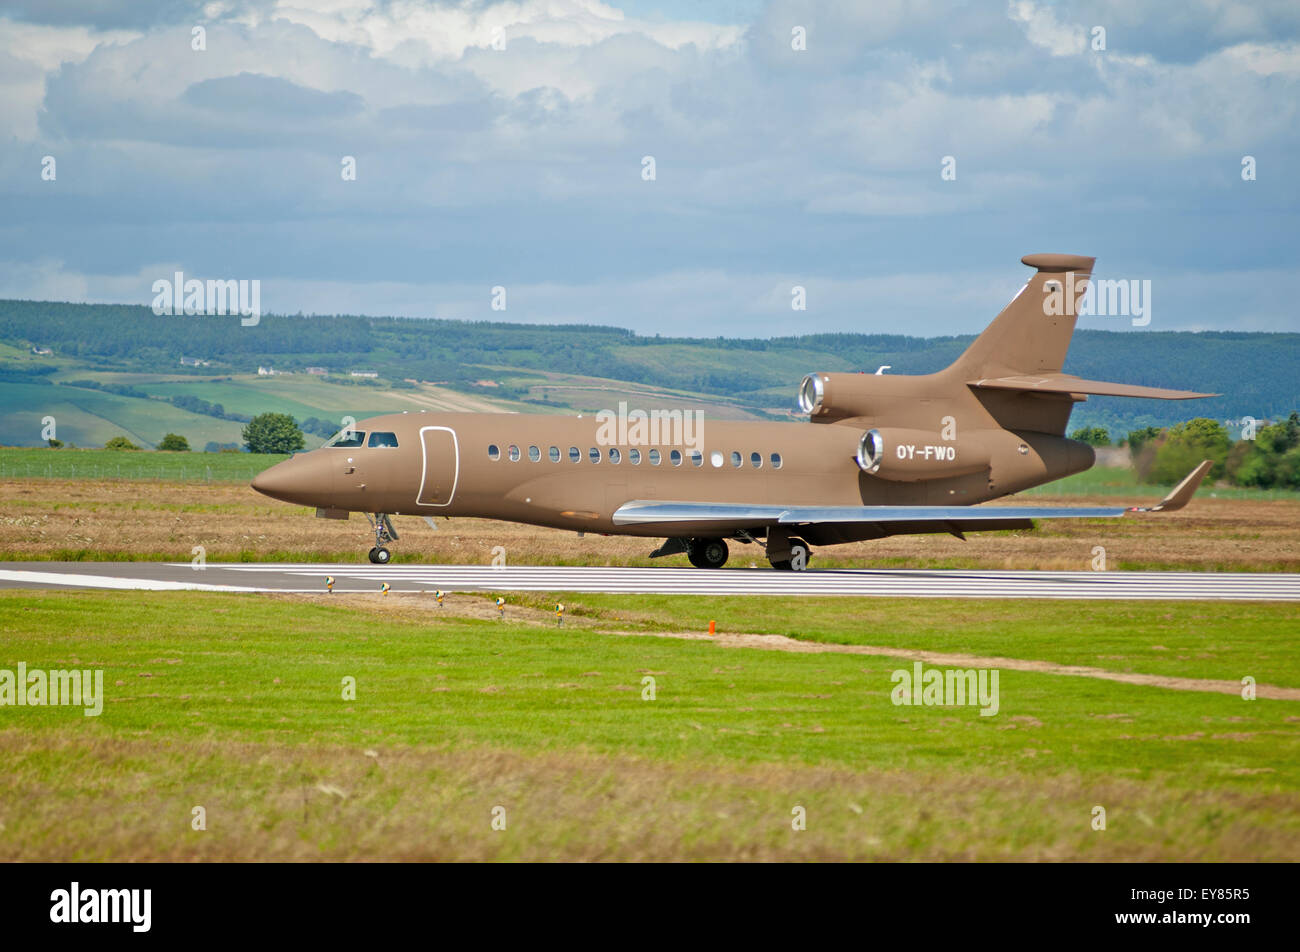 Dassault Falcon 7X (OY-FWO) Arriving at Inverness Airport Highland Scotland.  SCO 10,003. Stock Photo